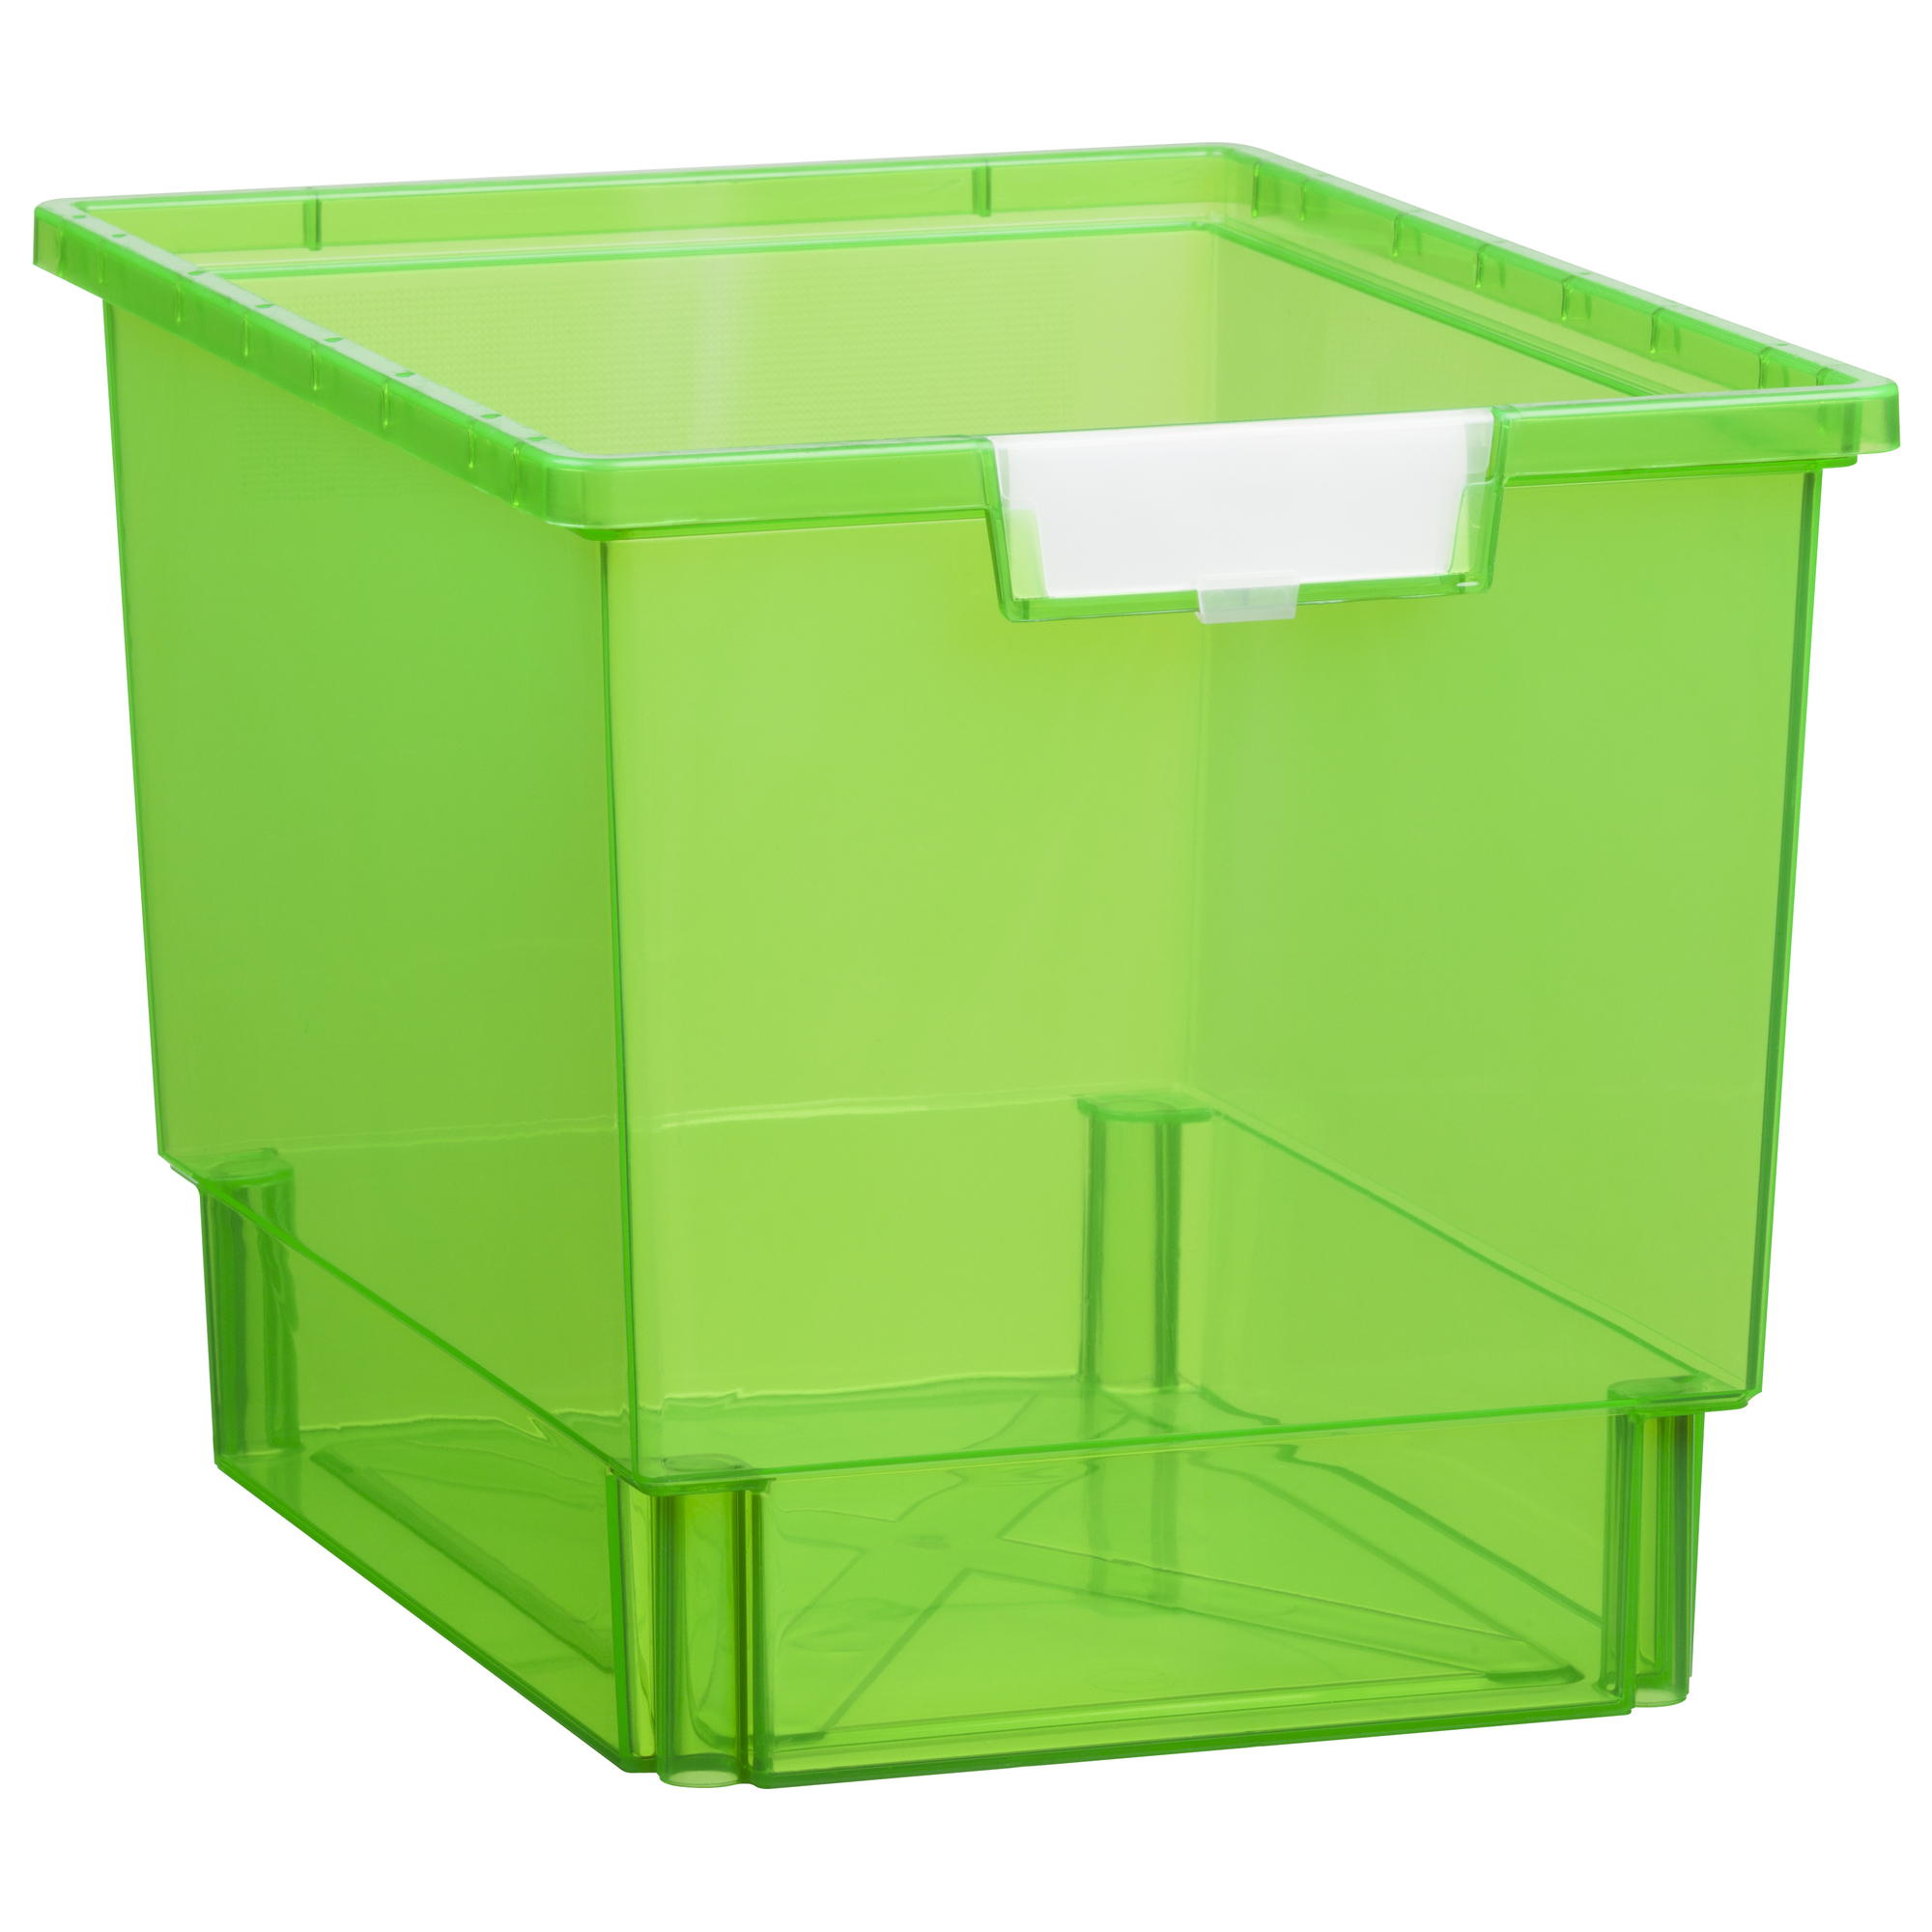 Certwood StorWerks, Slim Line 12Inch Tray in Neon Green - 3 Pack, Included (qty.) 3, Material Plastic, Height 9 in, Model CE1954FG3